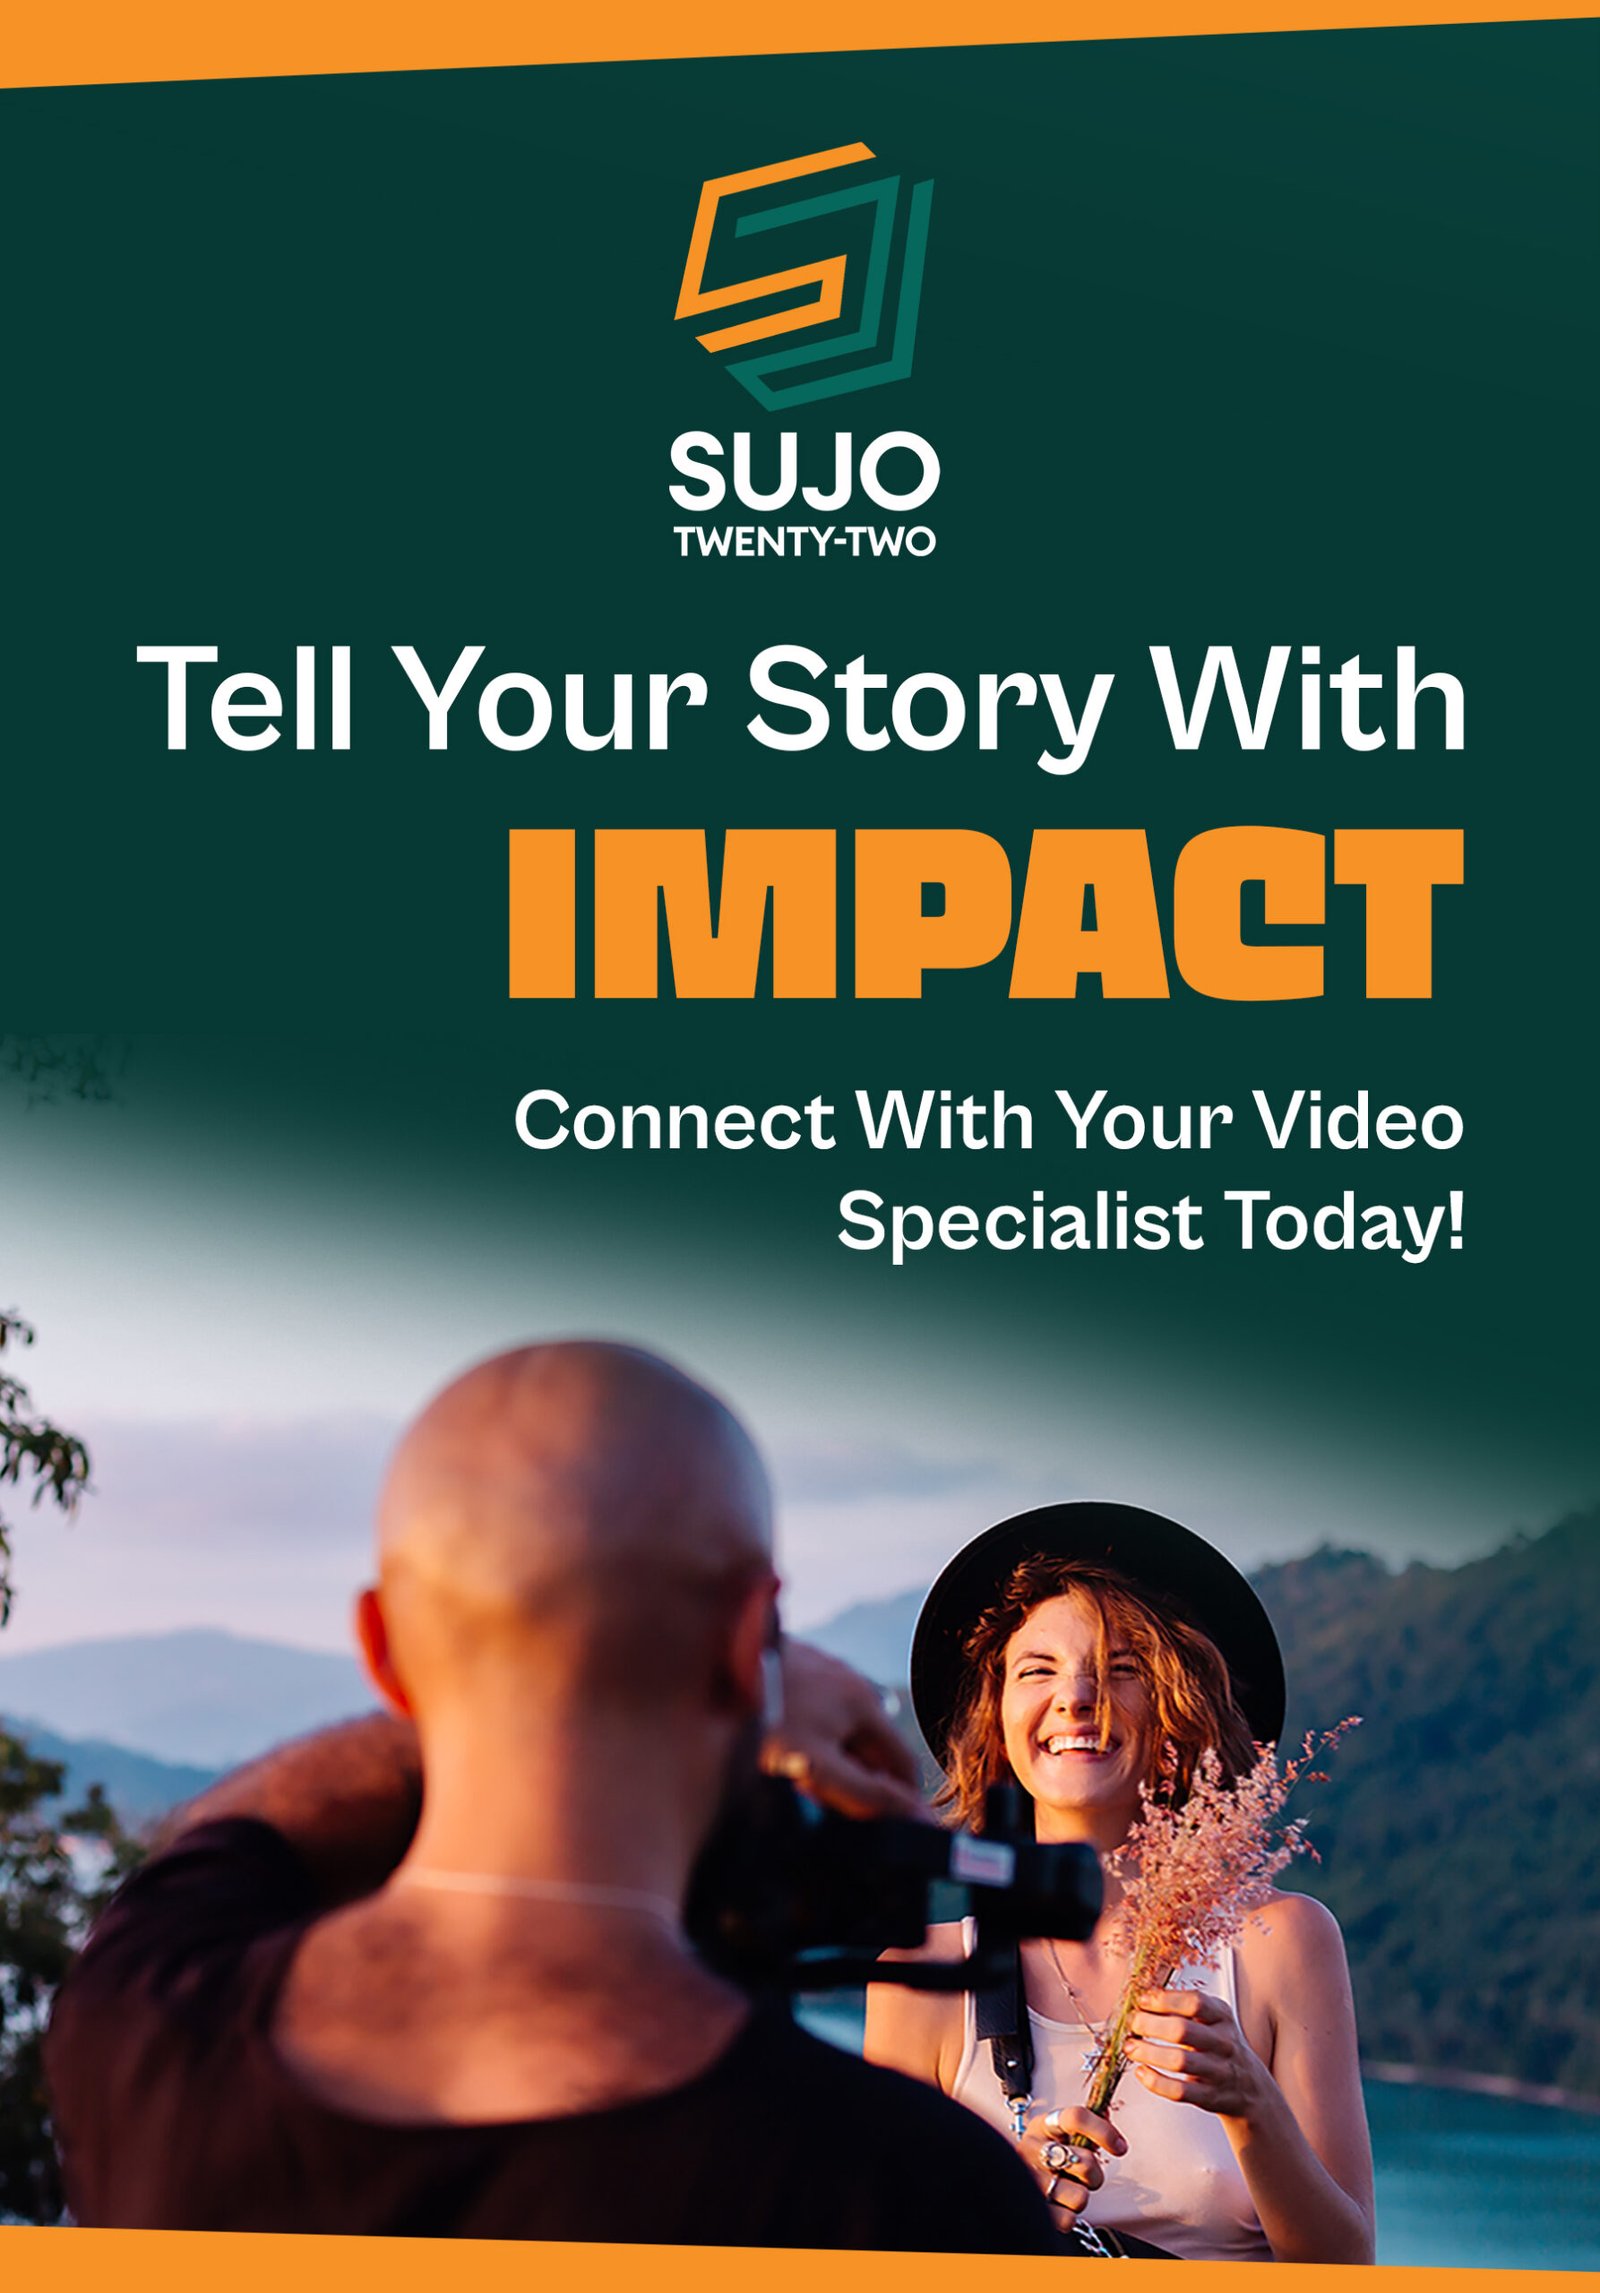 Tell Your Story With IMPACT - Video Production Services | SUJO Twenty-Two